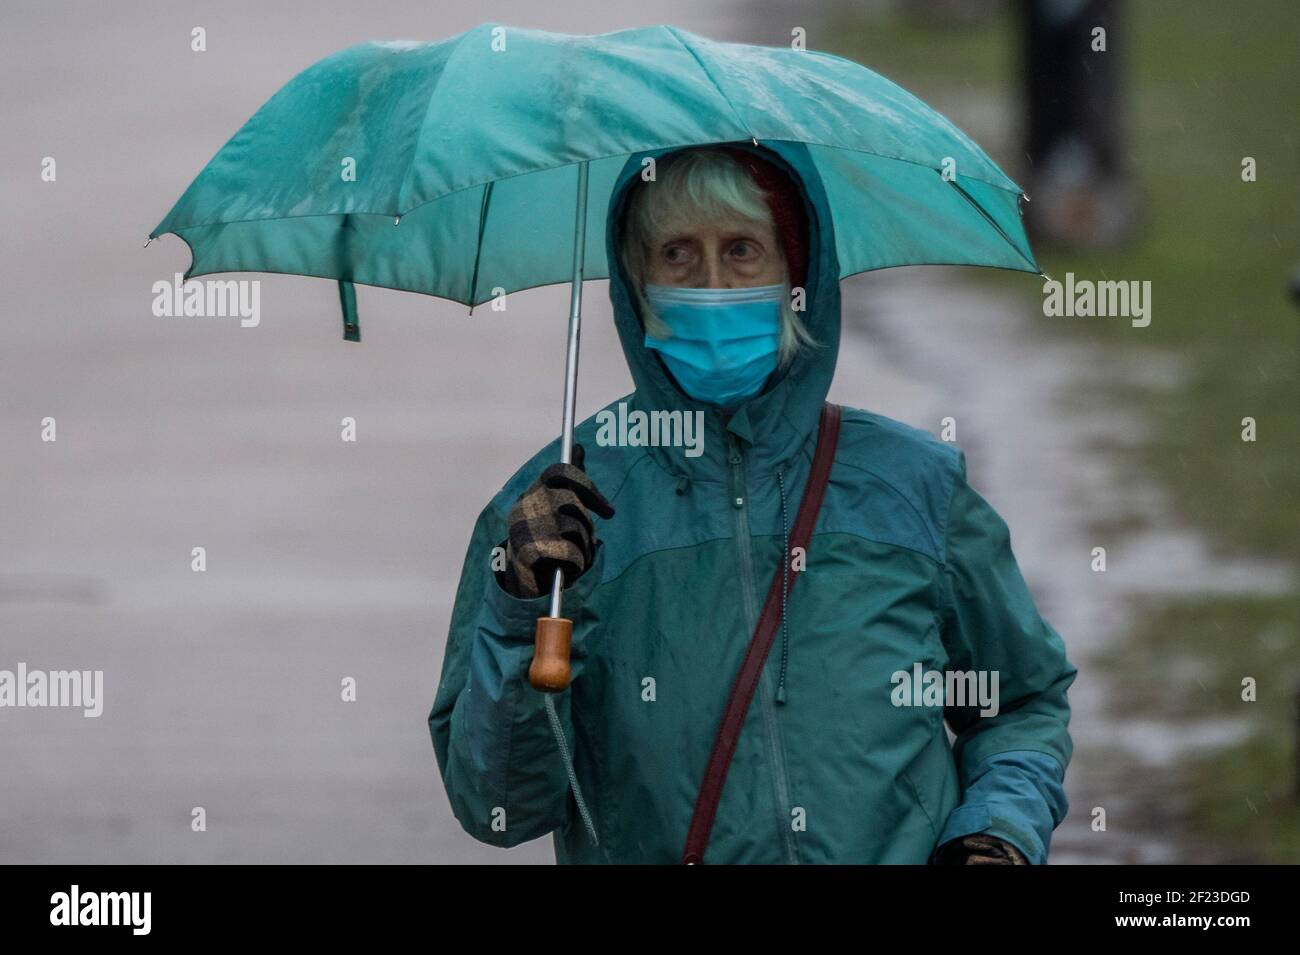 London, UK. 10th Mar, 2021. It is raining and cold but people are still out meeting friends and/or getting some exercise. Outdoor life on Clapham Common towards the end of Lockdown 3. Credit: Guy Bell/Alamy Live News Stock Photo